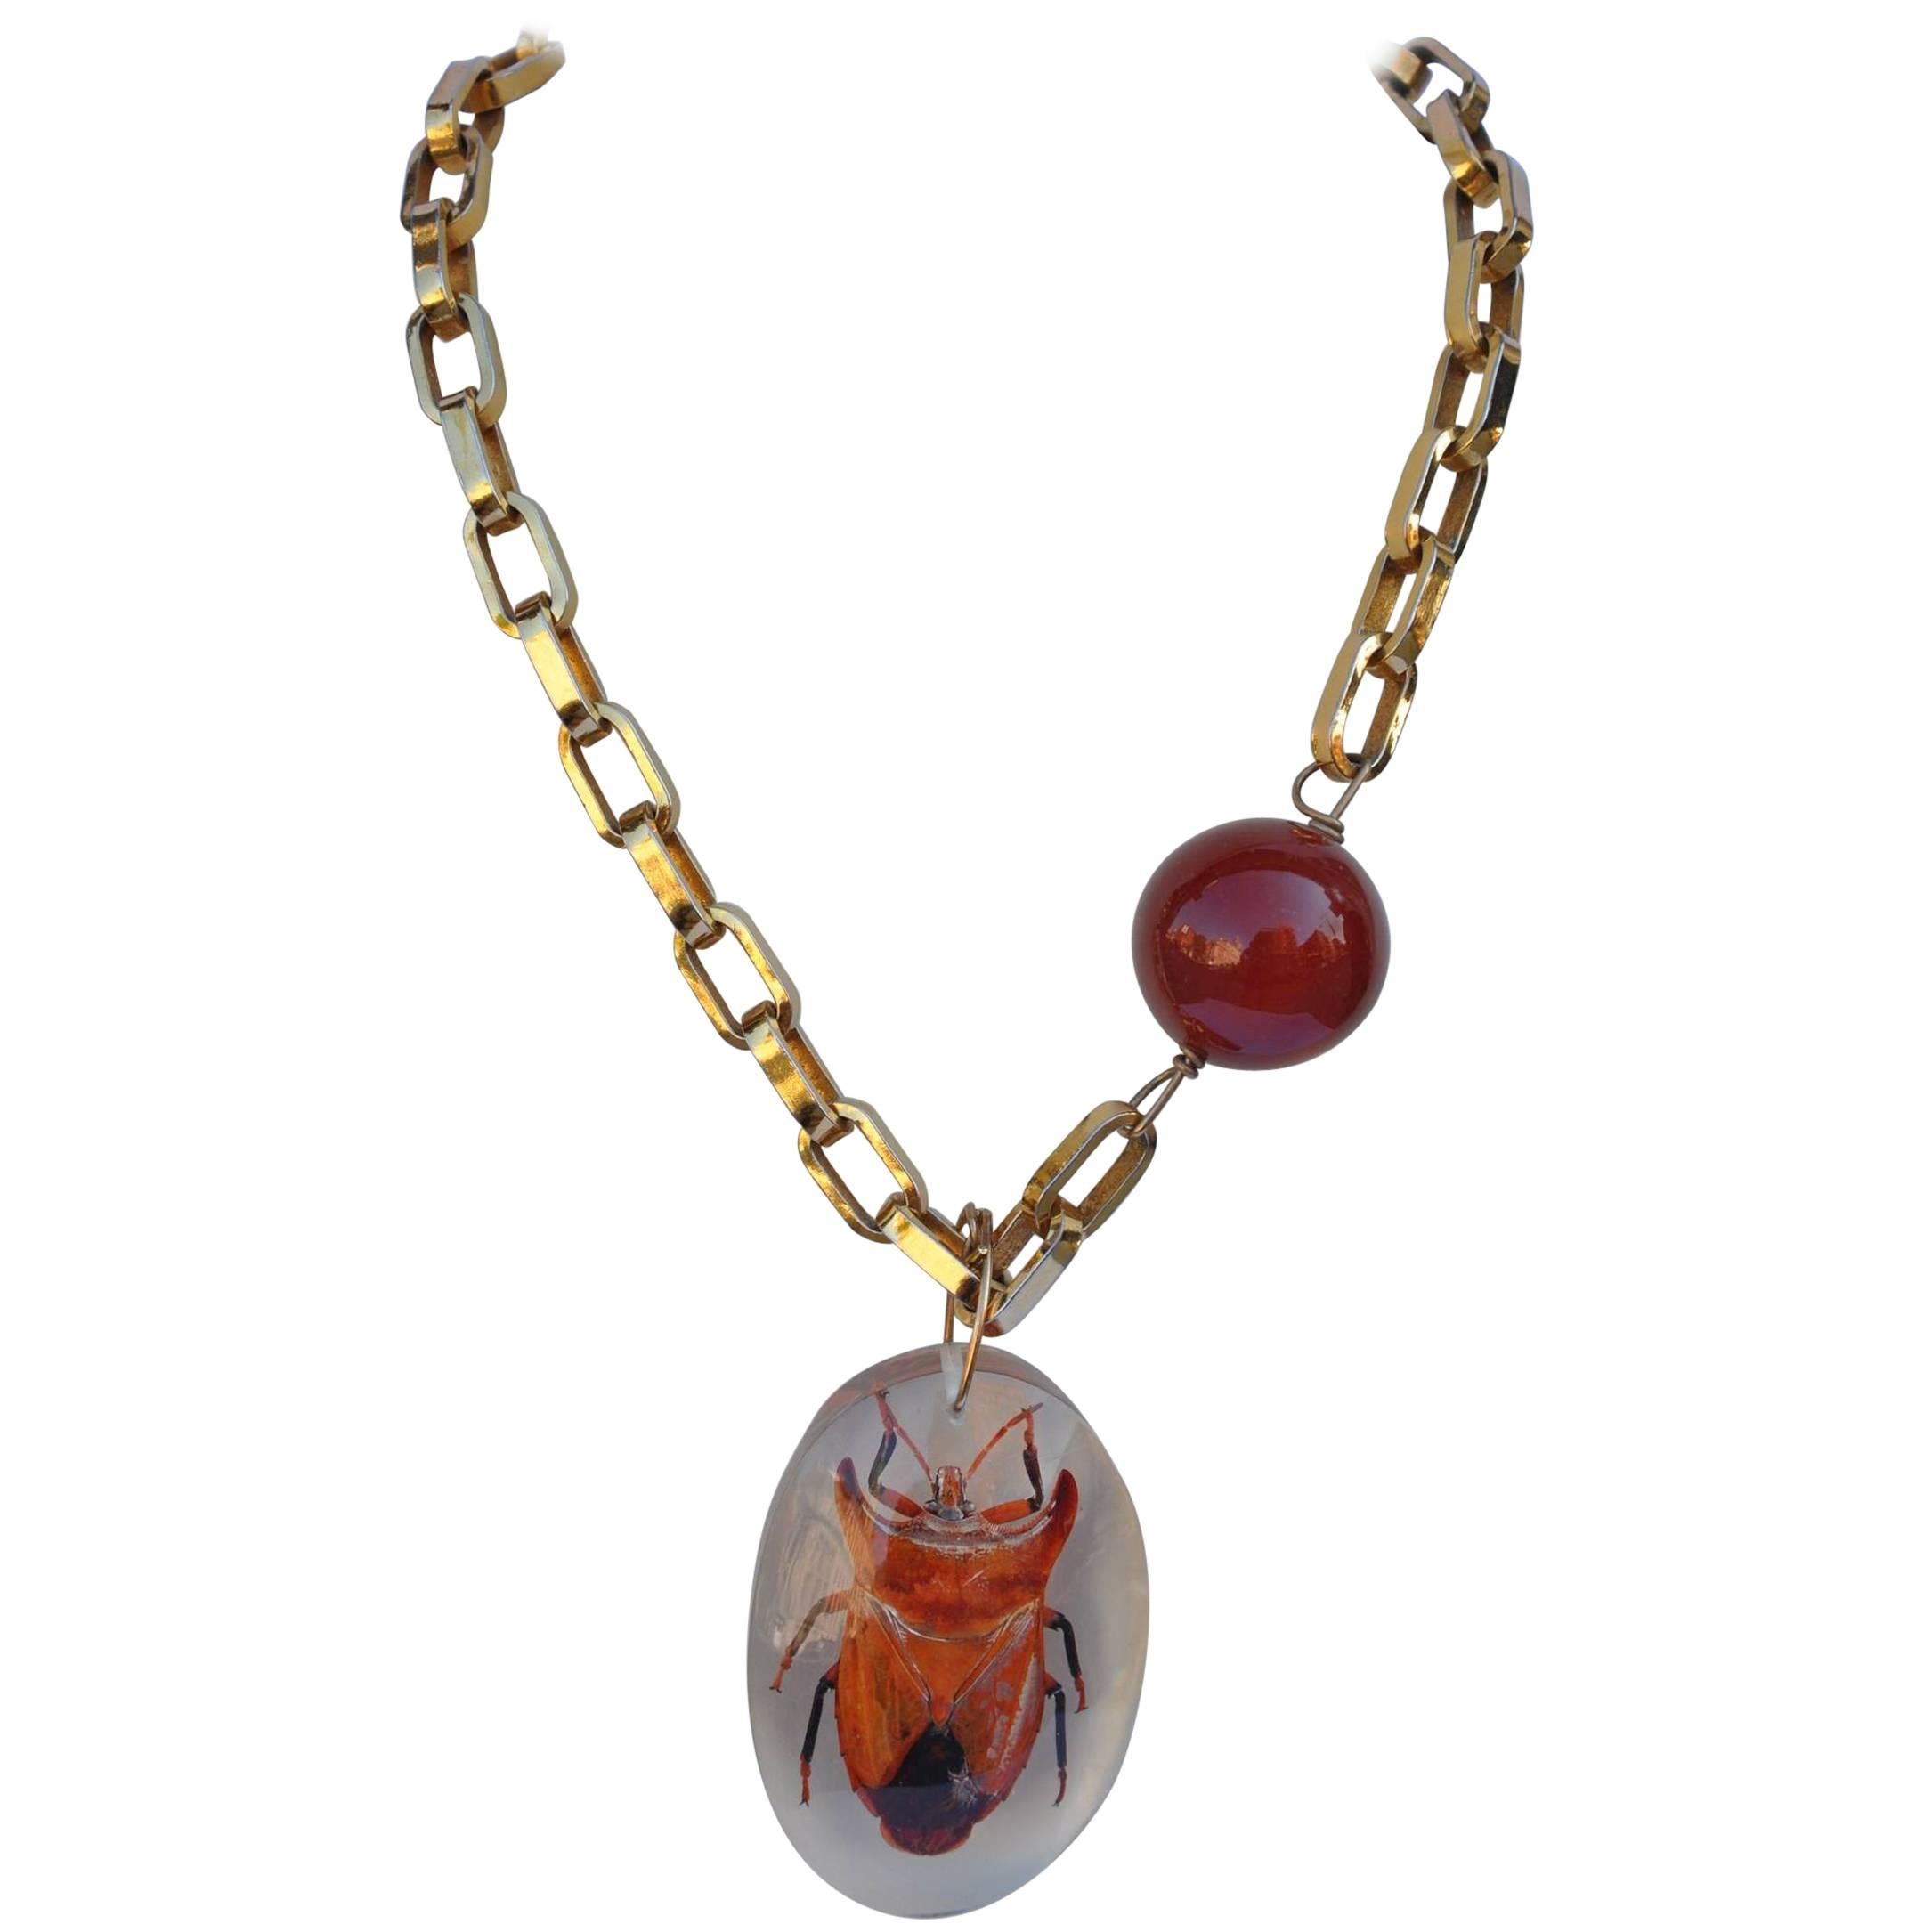 Vendome Thick Link Accented with Amber-Hue Globe and Lucite Bug Pendant For Sale